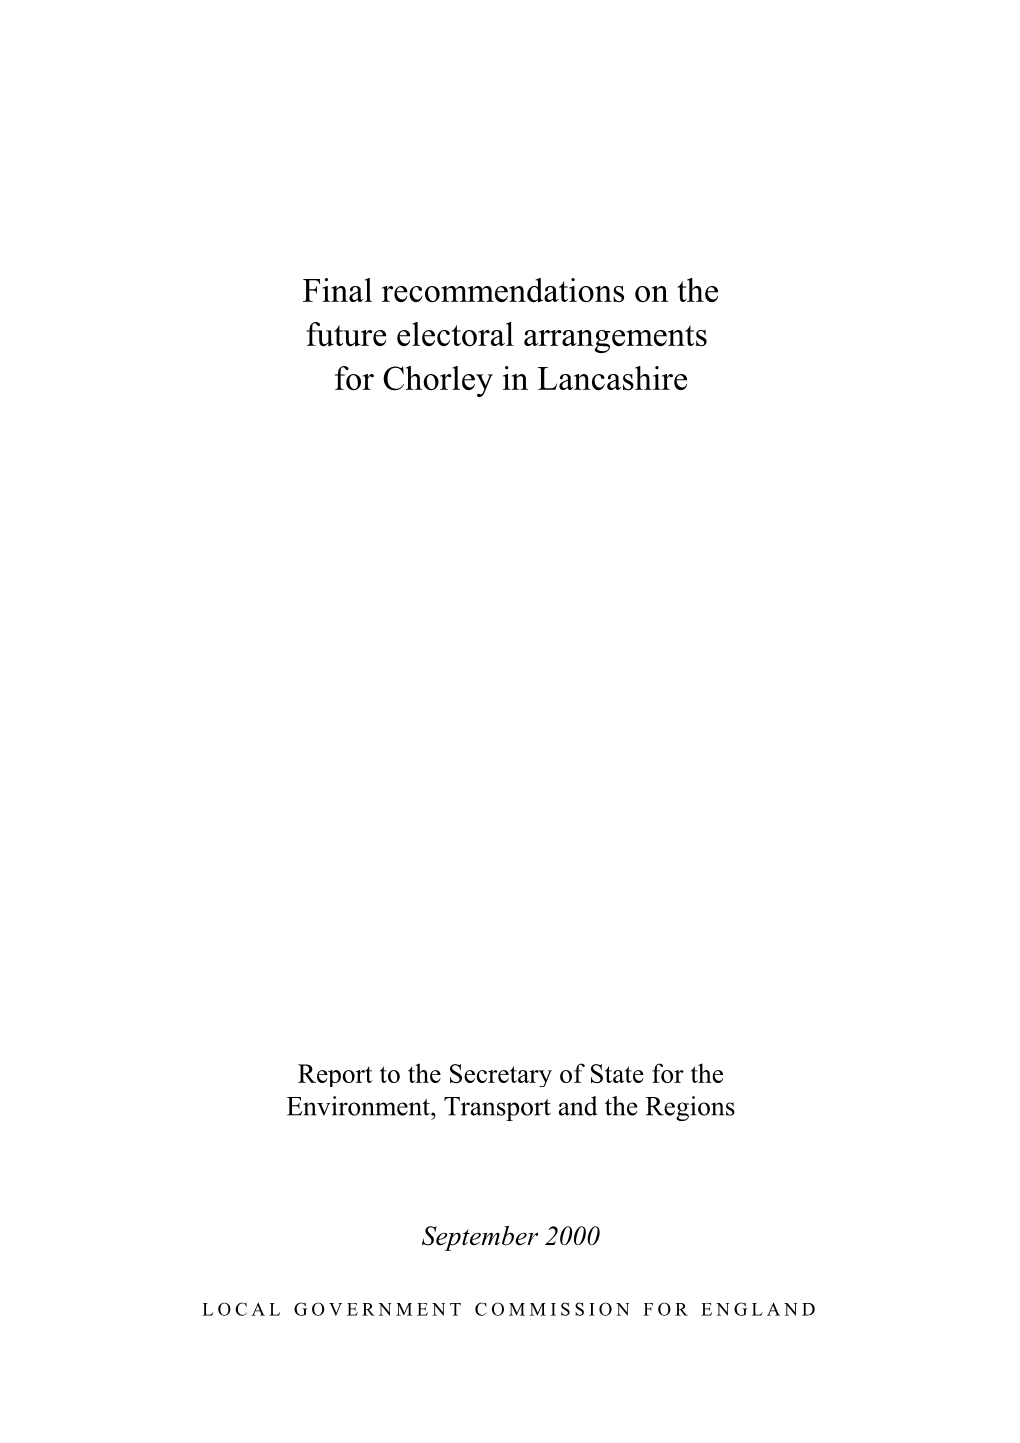 Final Recommendations on the Future Electoral Arrangements for Chorley in Lancashire